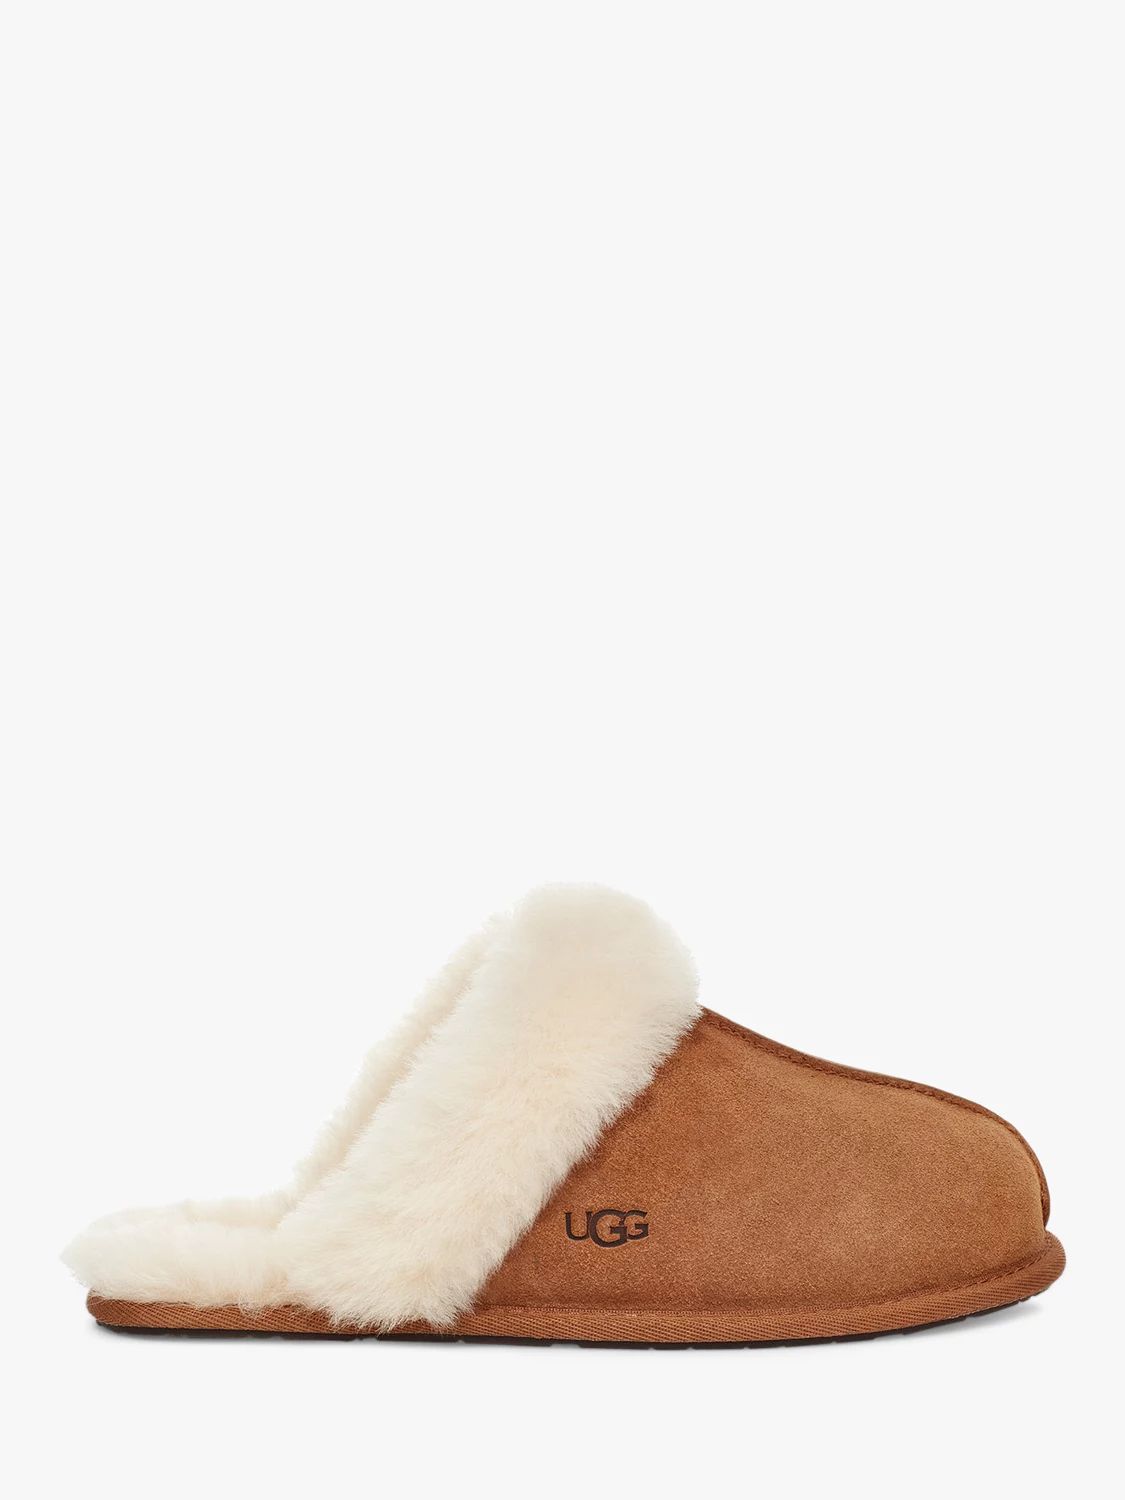 UGG Scuffette Sheepskin and Suede Slippers, Chestnut | John Lewis (UK)